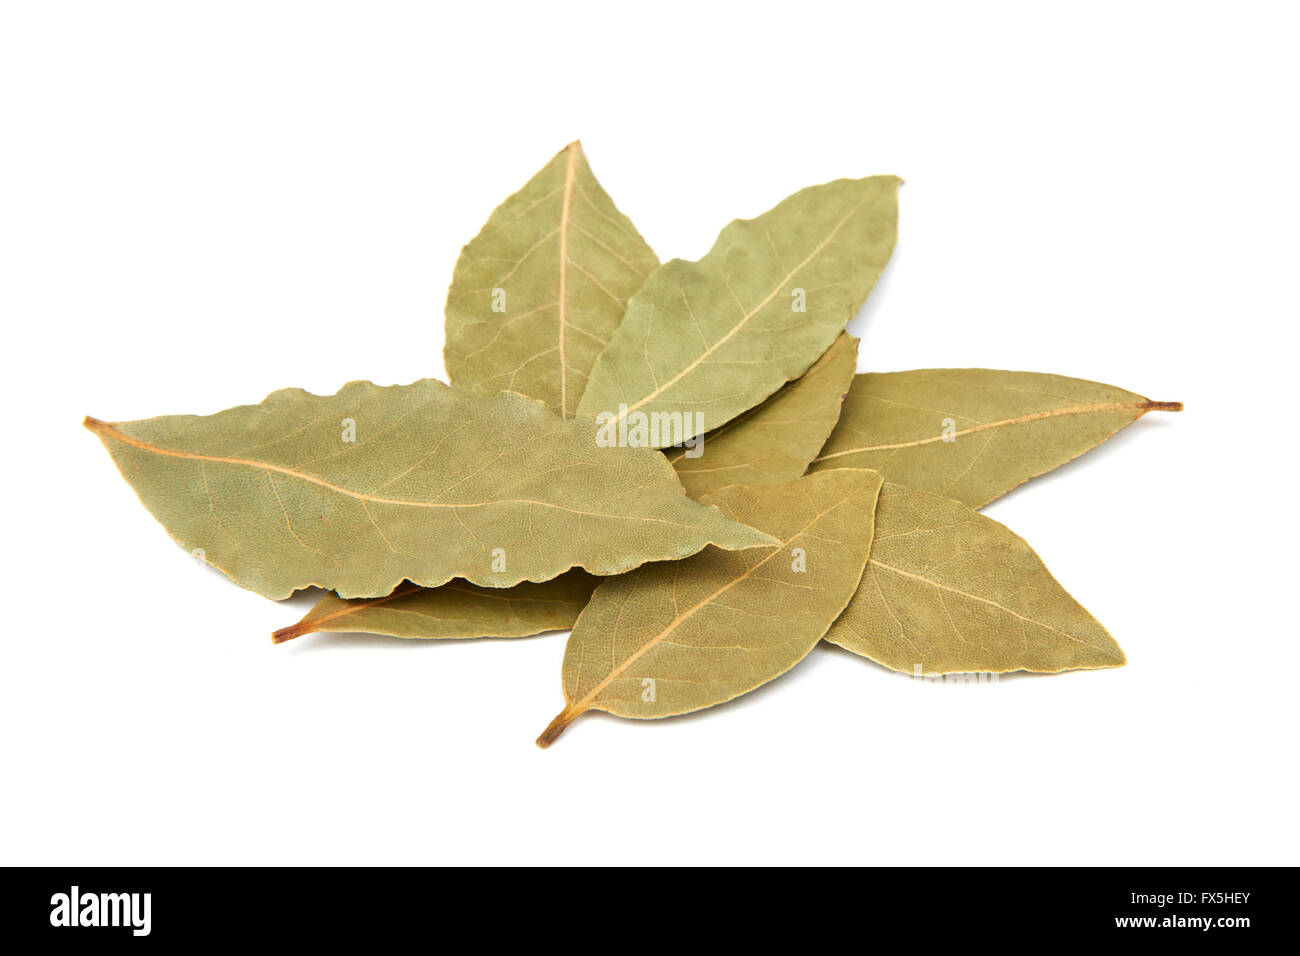 Closeup image of dried bay leaves isolated on a white background Stock Photo